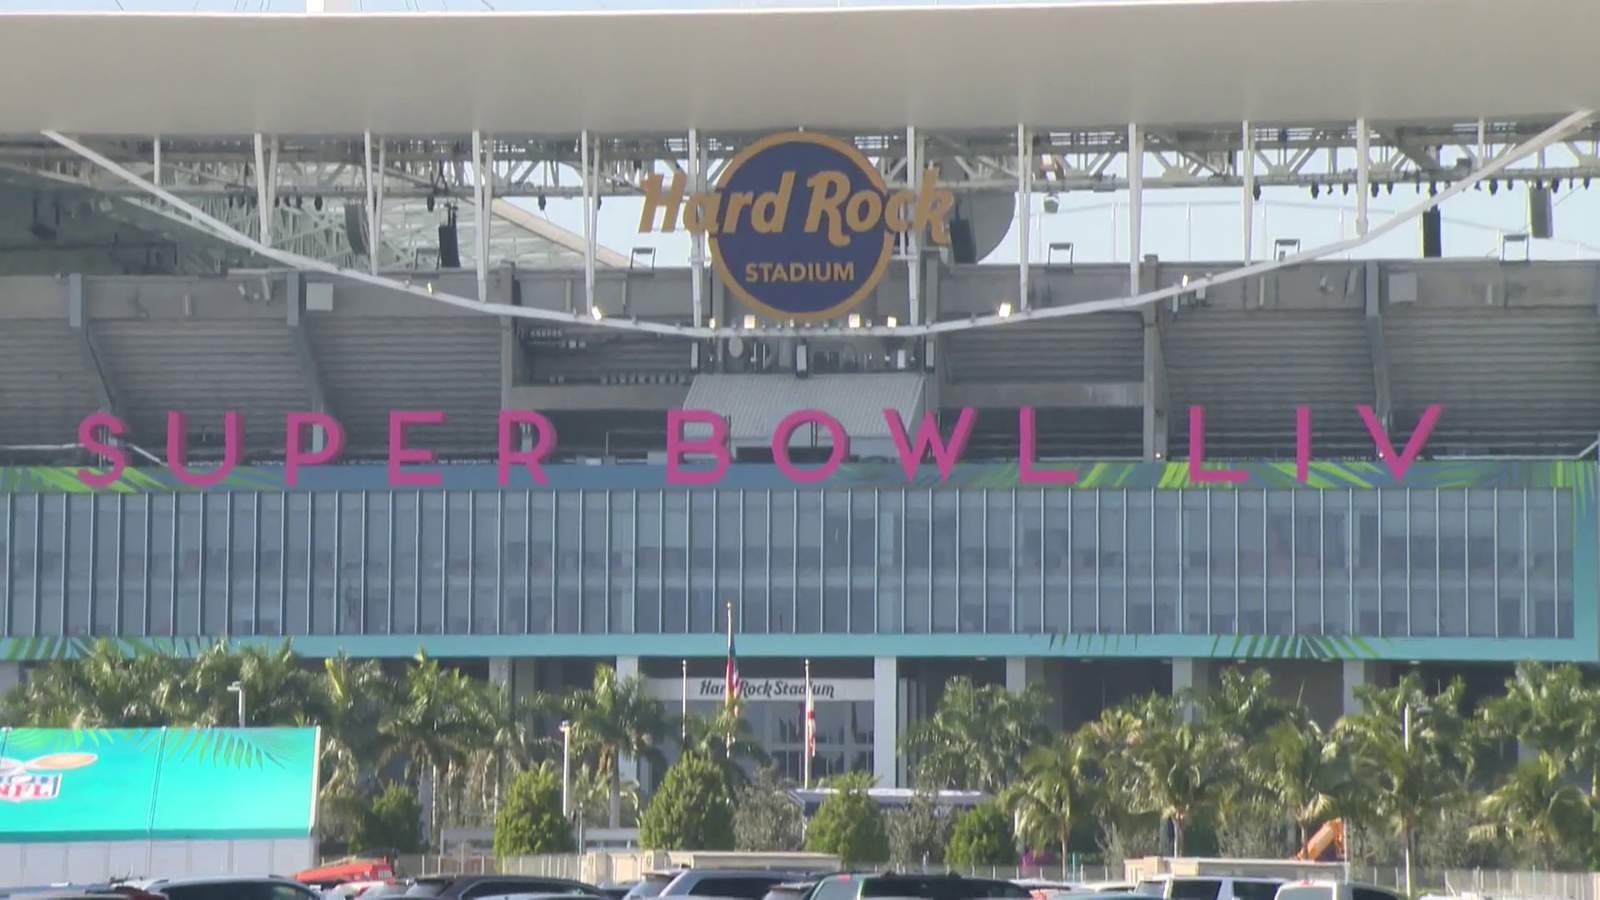 How much will ticket to Super Bowl LIV cost you?